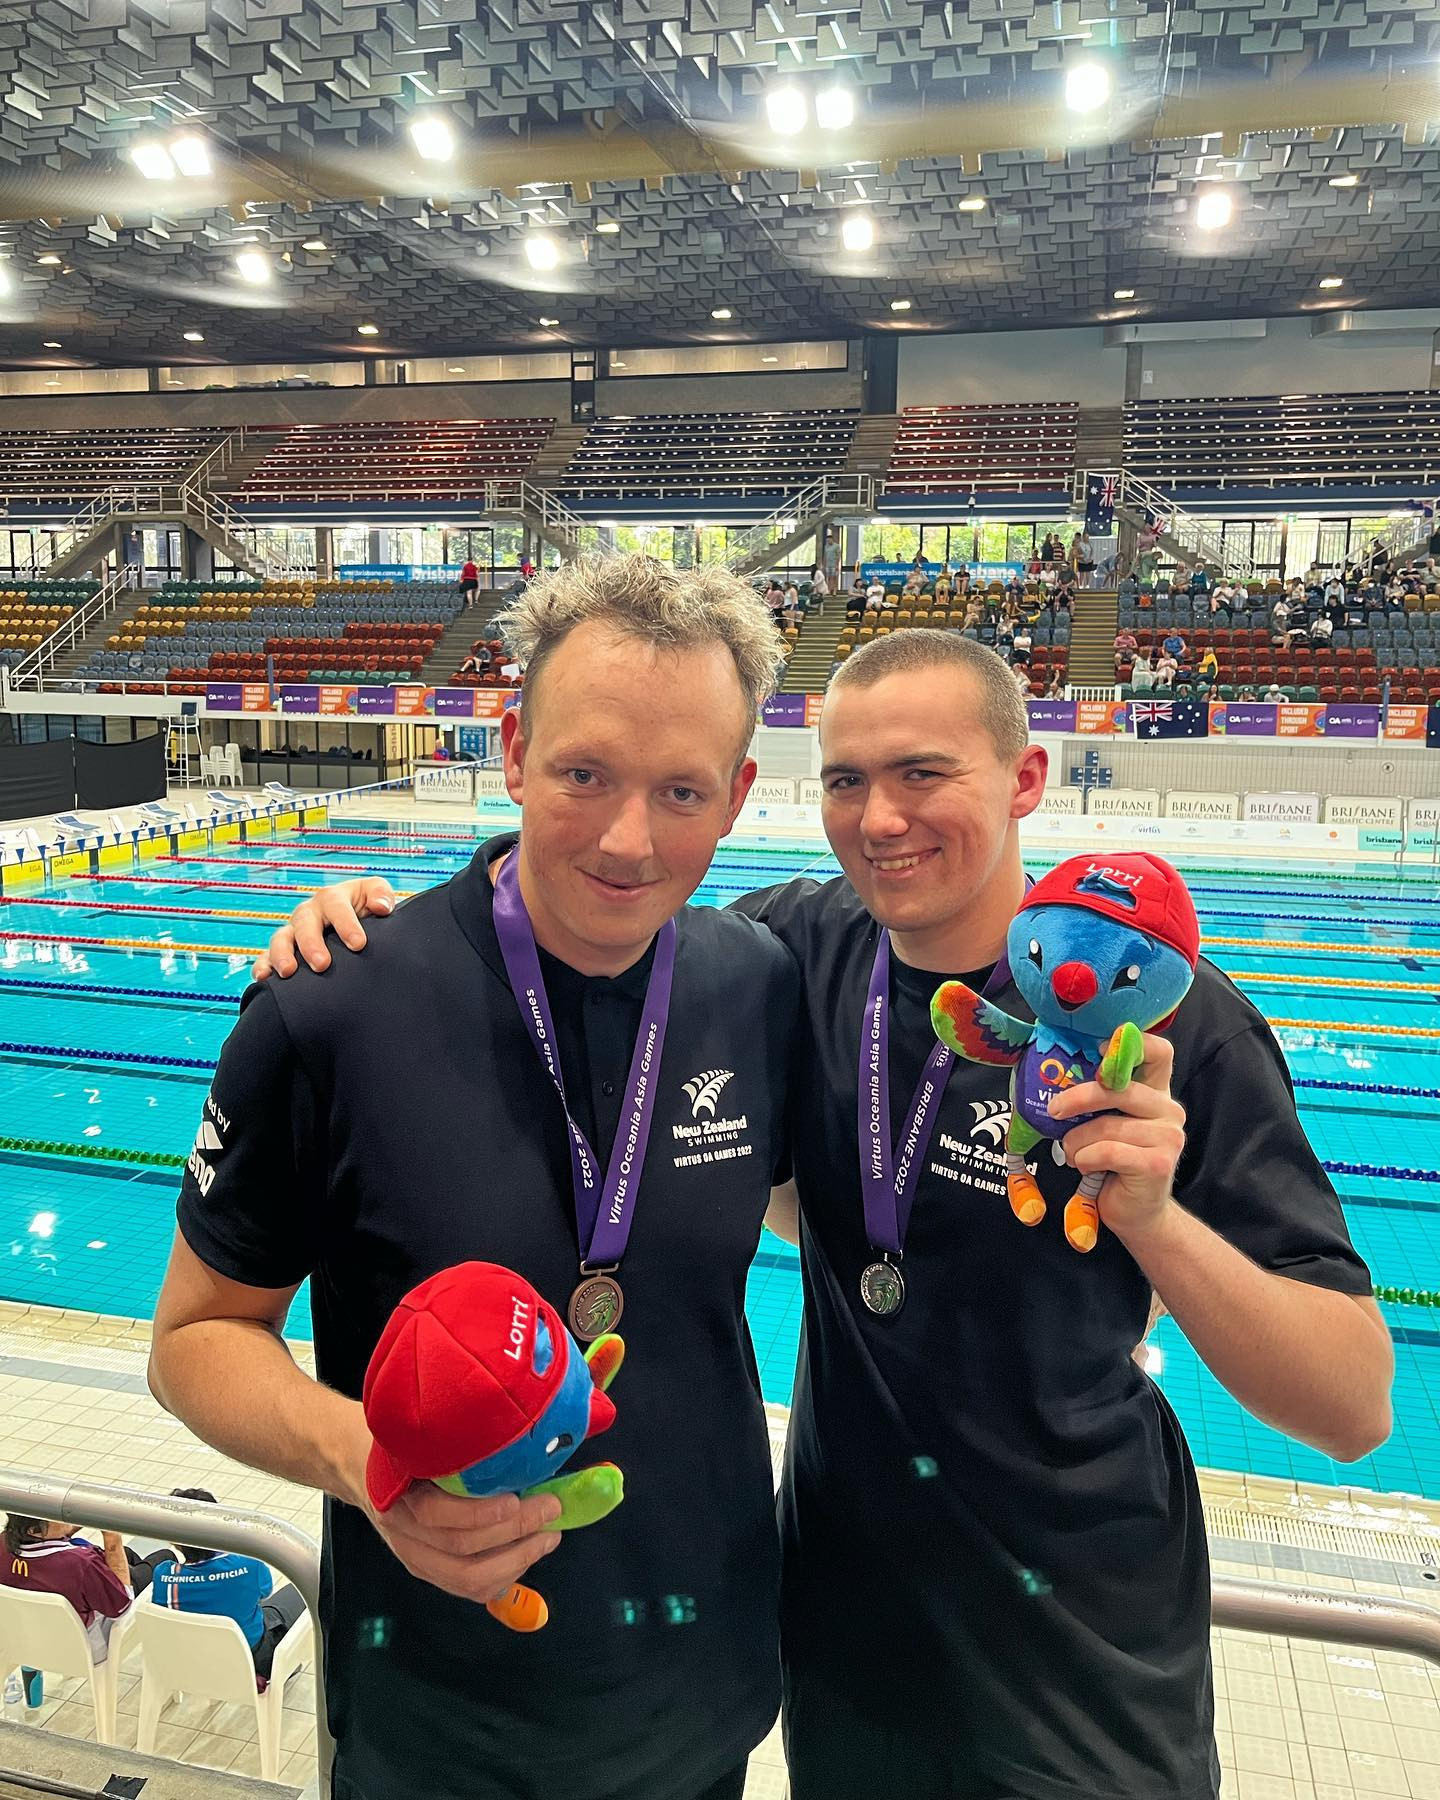 Tate Pichon, left, and Lance Dustow, right, will be competing in the II-3 swimming event at the Virtus Global Games ©Paralympics New Zealand